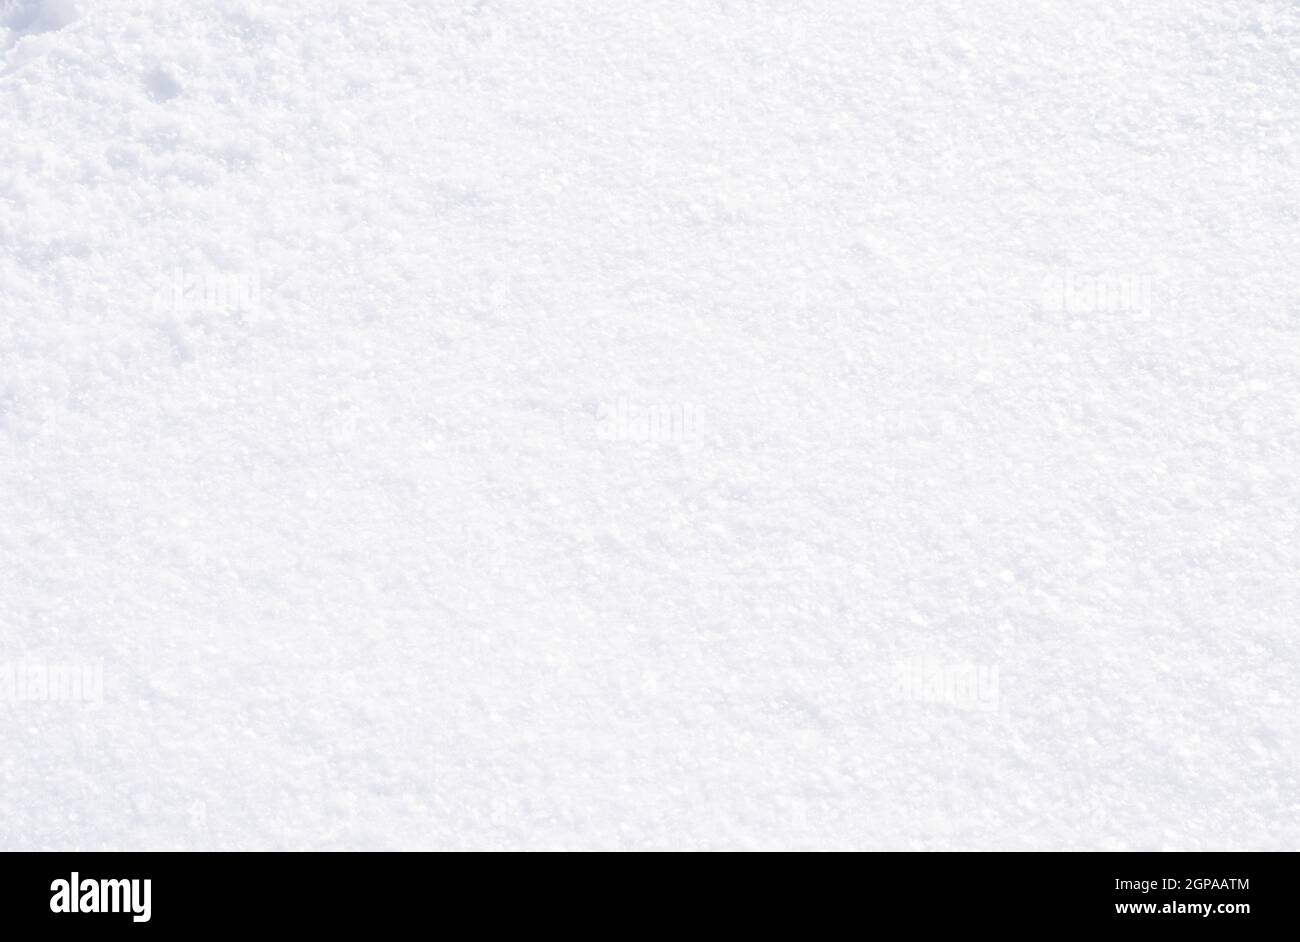 Snow makes a nice white background with a bit of texture. Lots of copy space available here with enough texture to make it interesting. Stock Photo